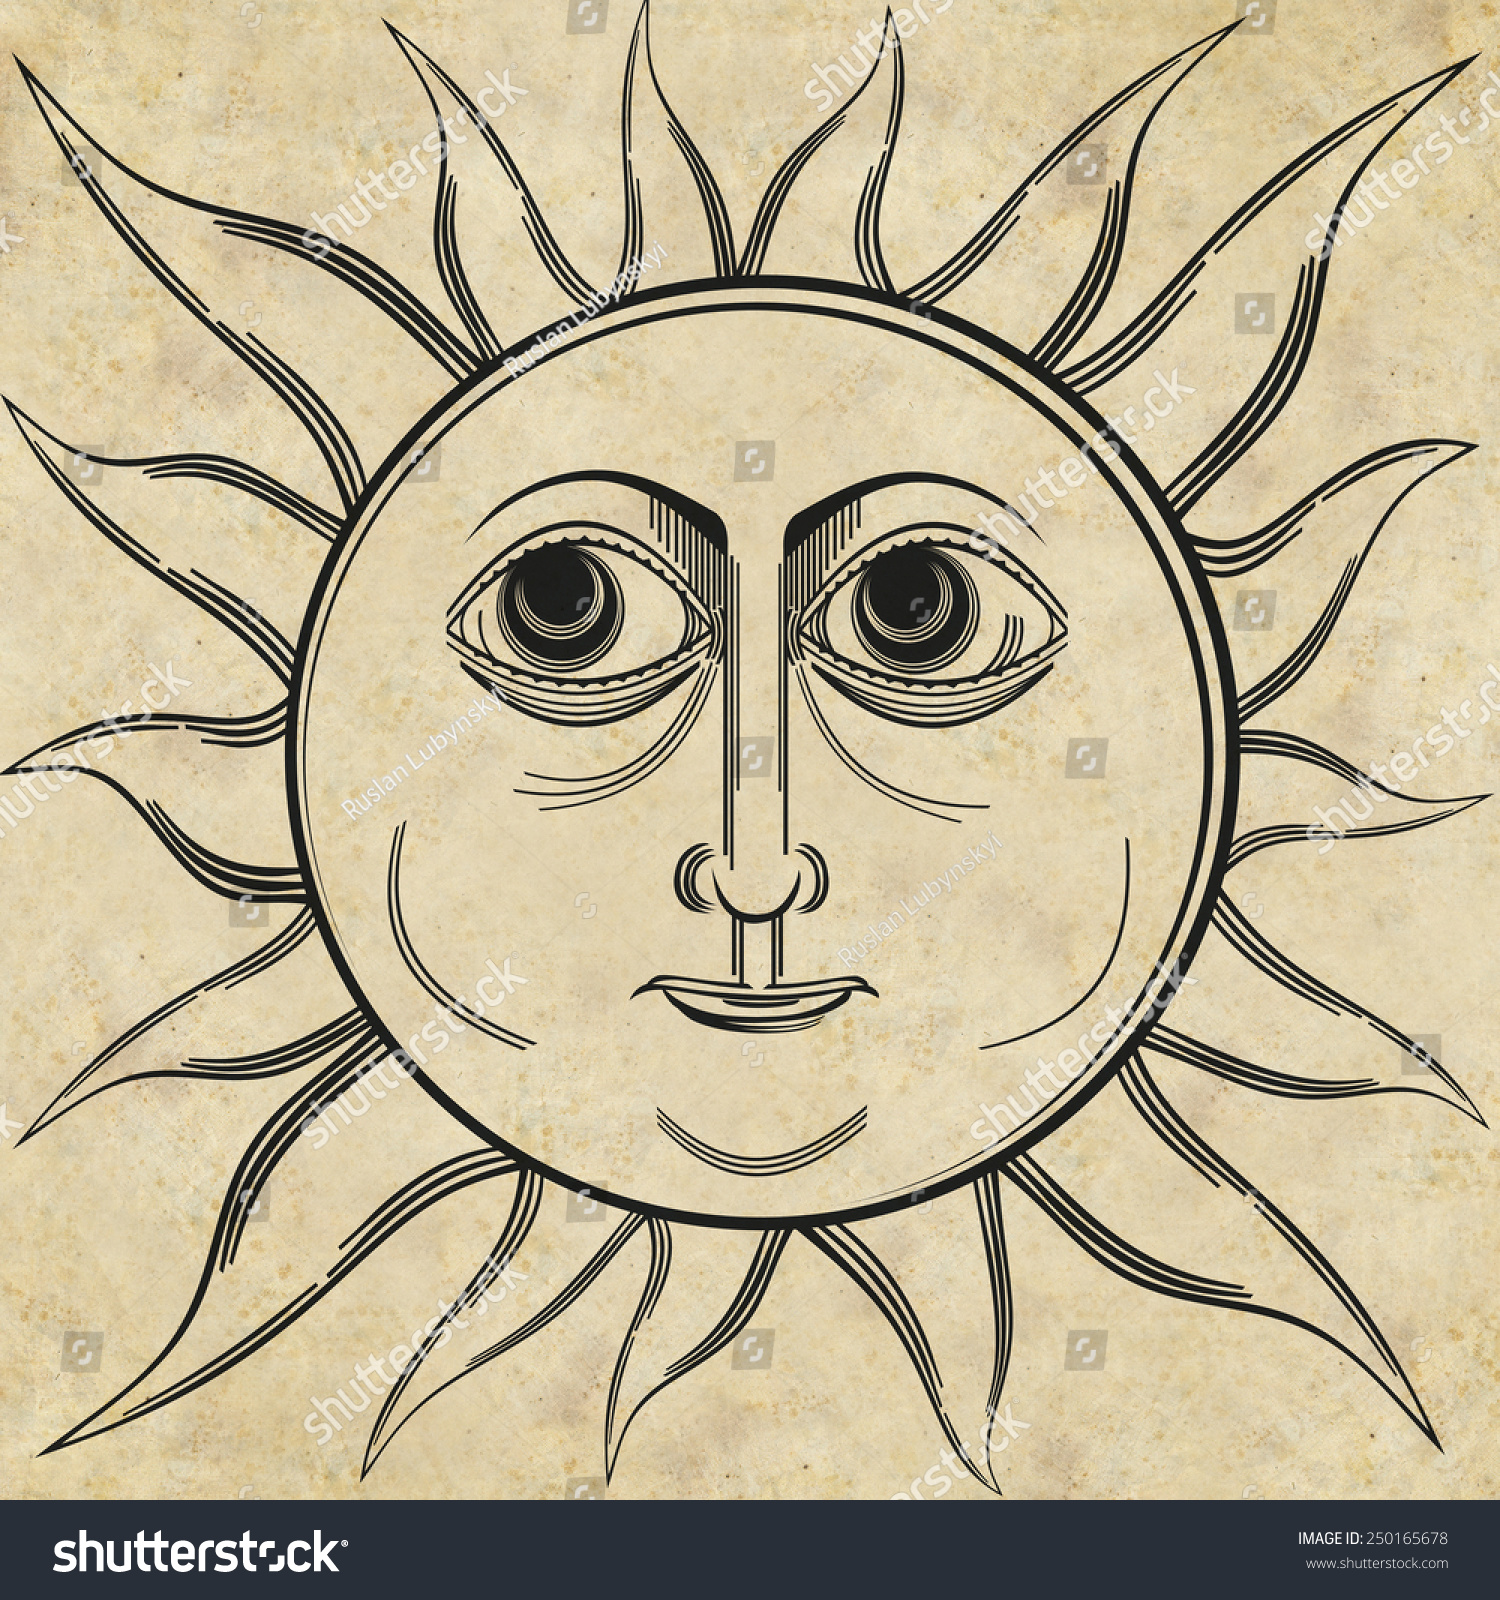 Mystical Old Engraving With The Face Of The Sun Stock Photo 250165678 ...